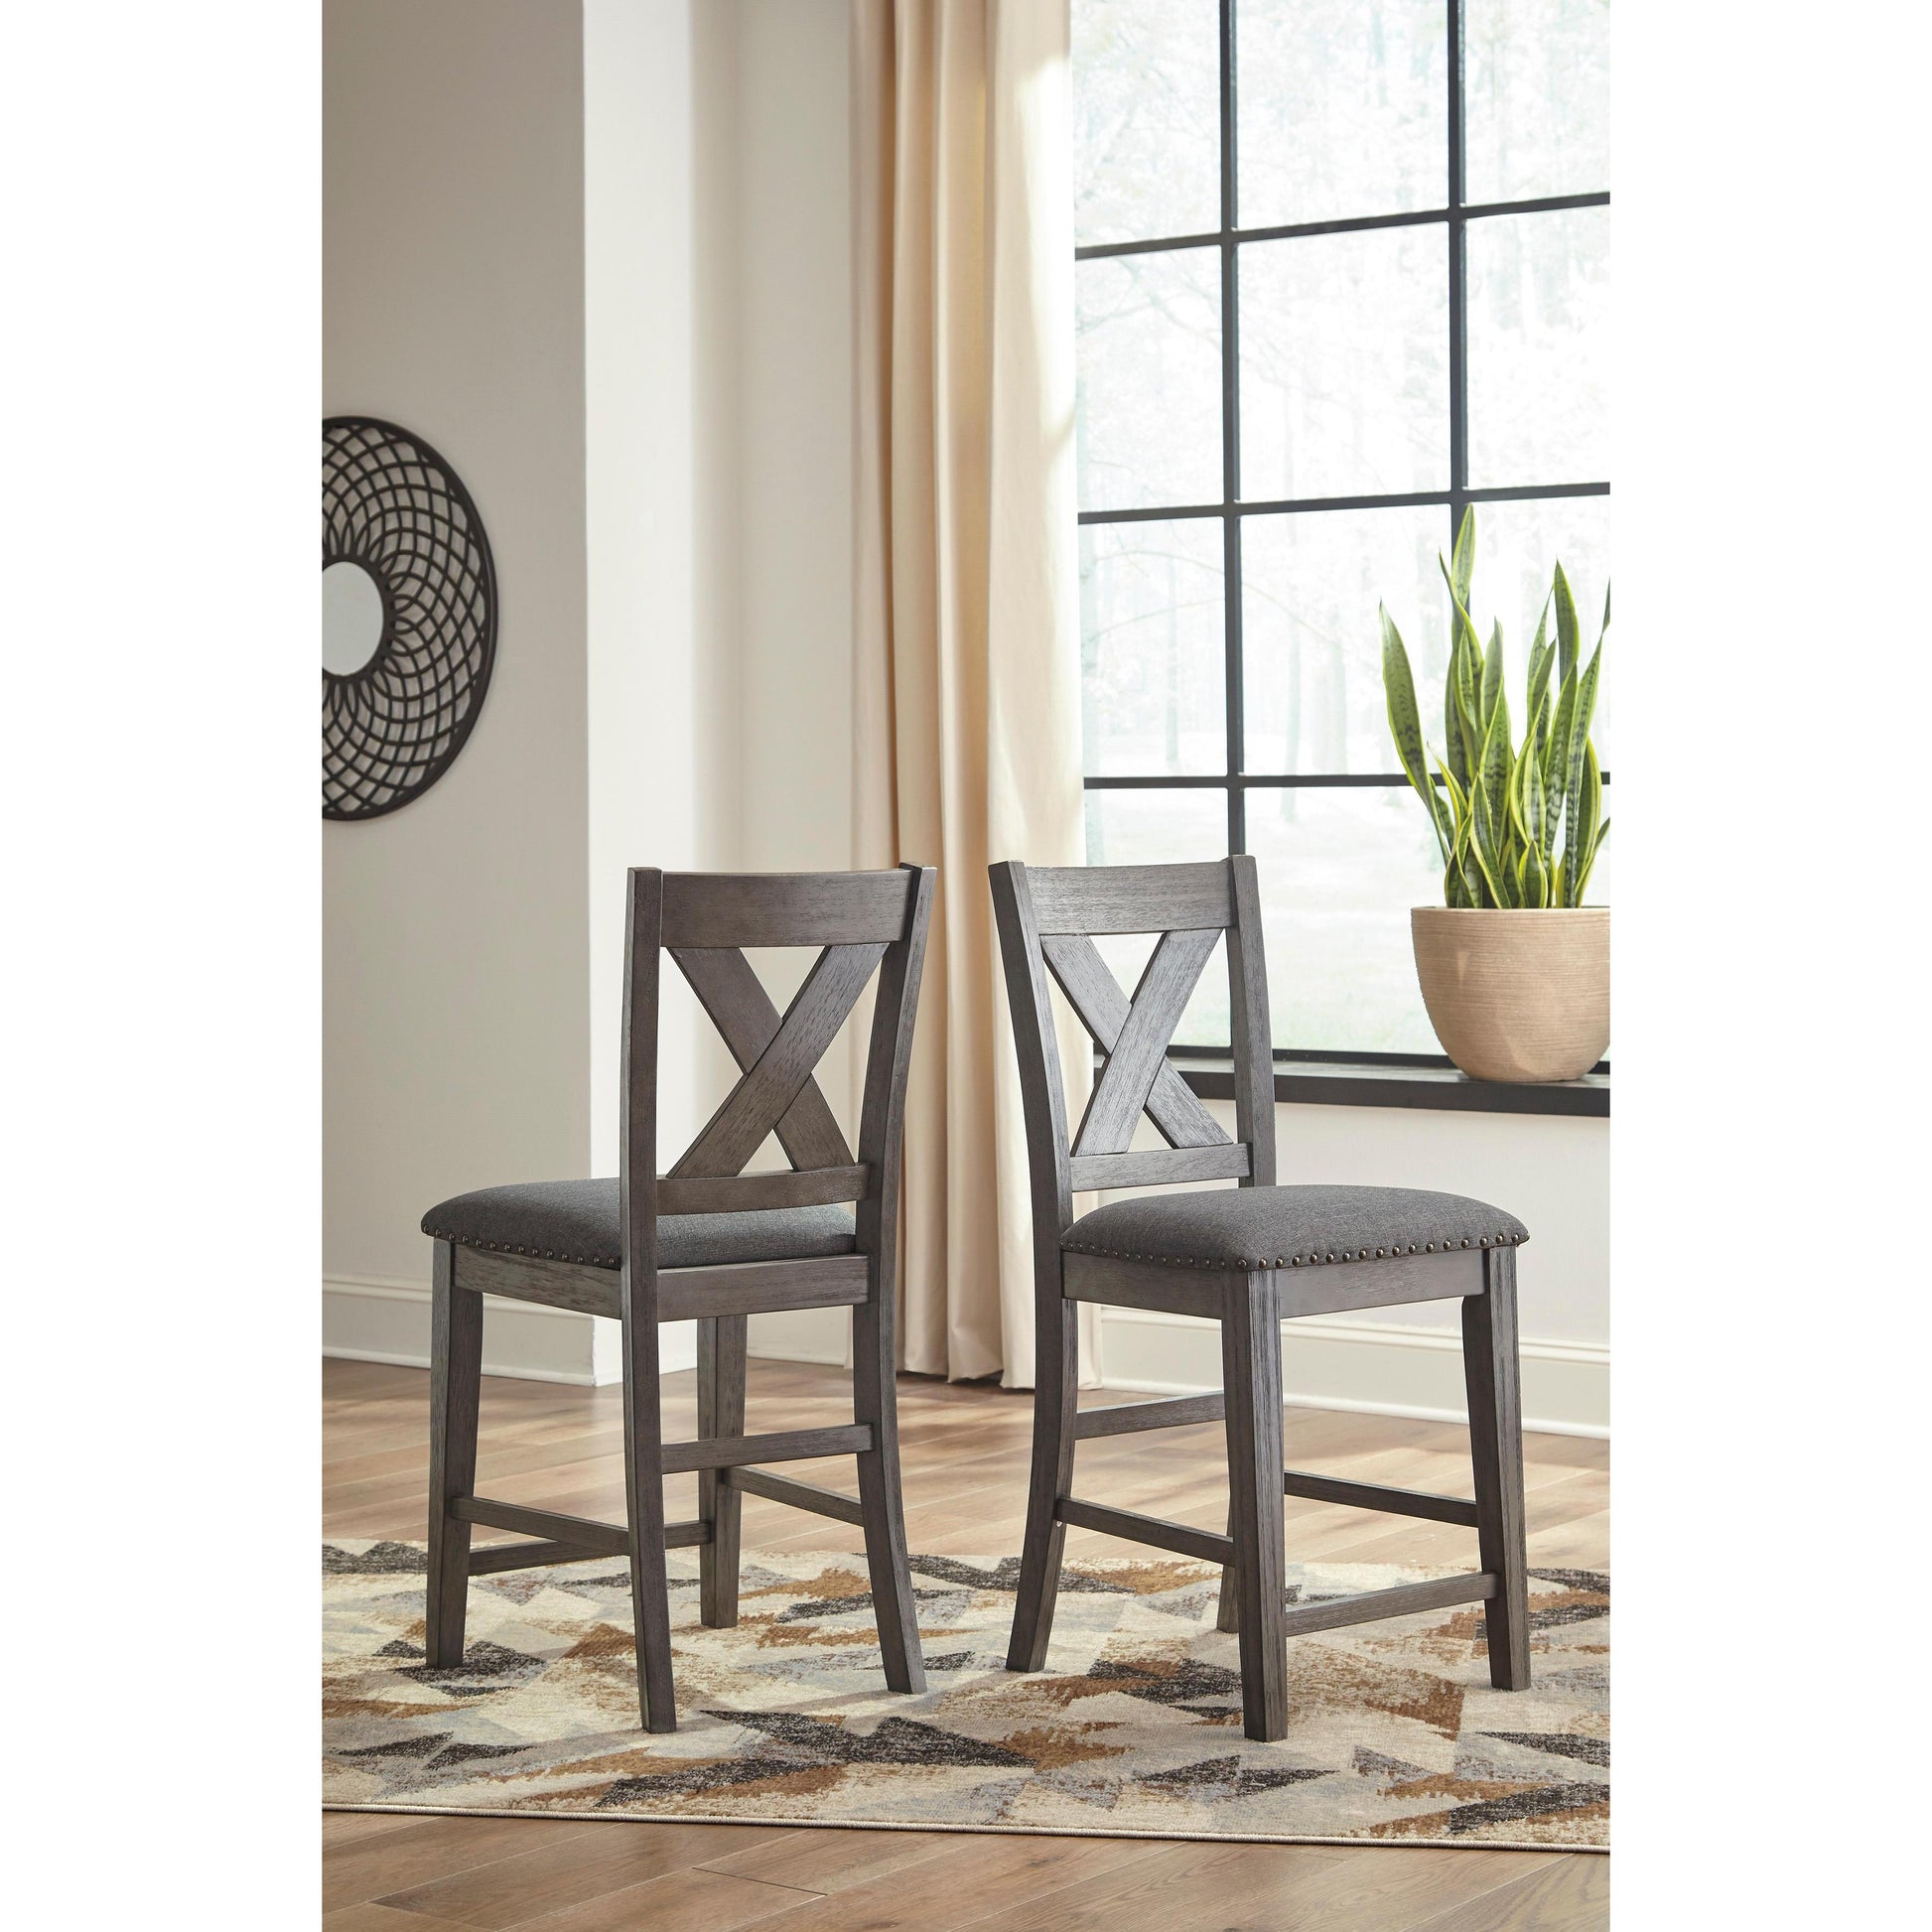 Signature Design by Ashley Caitbrook D388D2 5 pc Counter Height Dining Set IMAGE 3